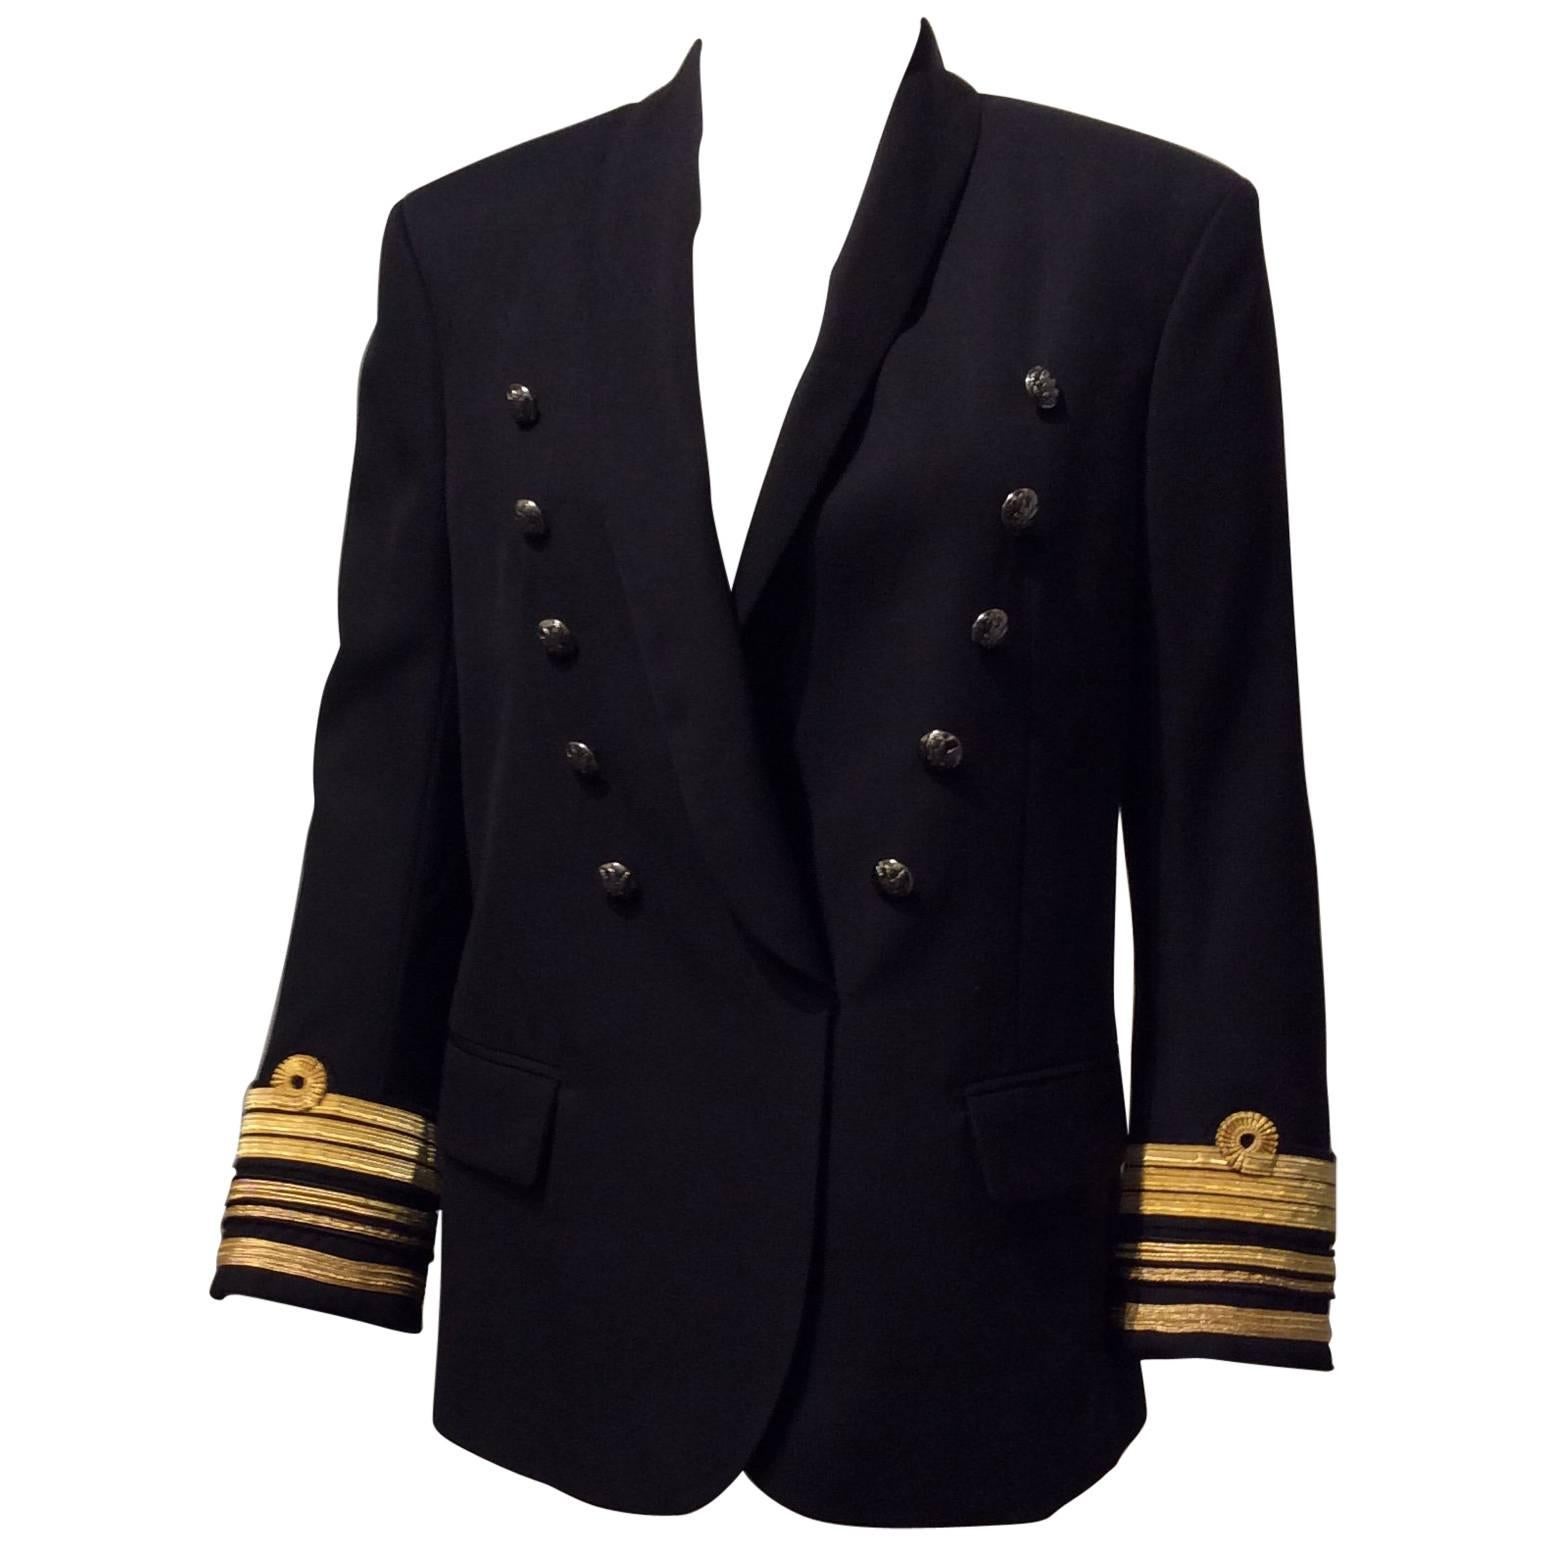 Balmain Black Double-breasted Uniform Inspired Jacket With Gold Trim Sz 38 (Us6) For Sale